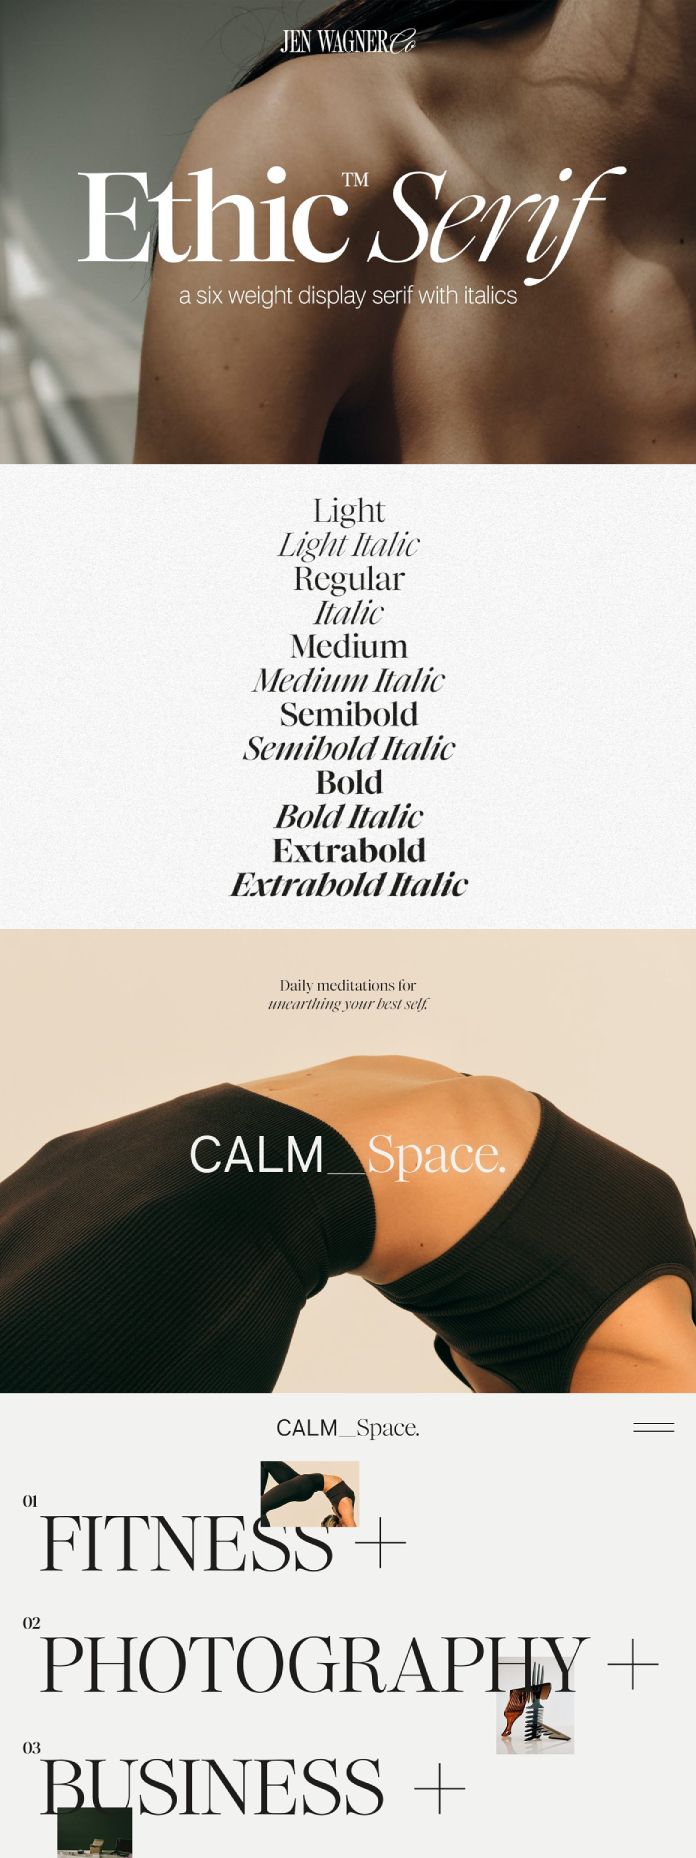 Ethic Serif Font Family by Jen Wagner